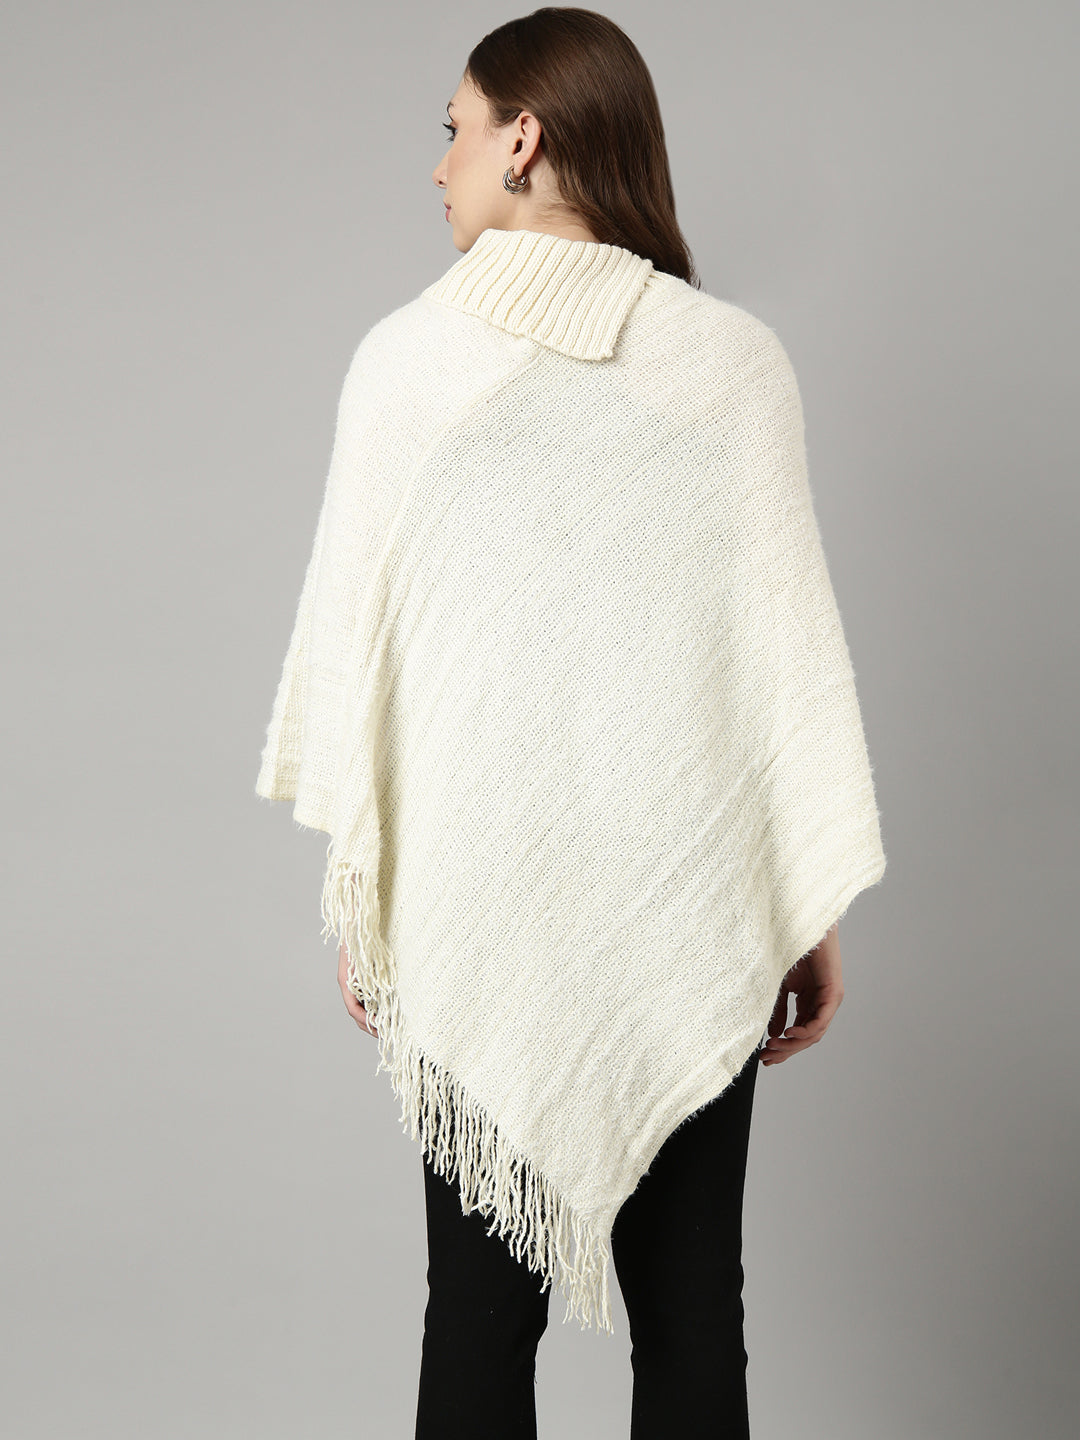 Women Solid Off White Longline Poncho